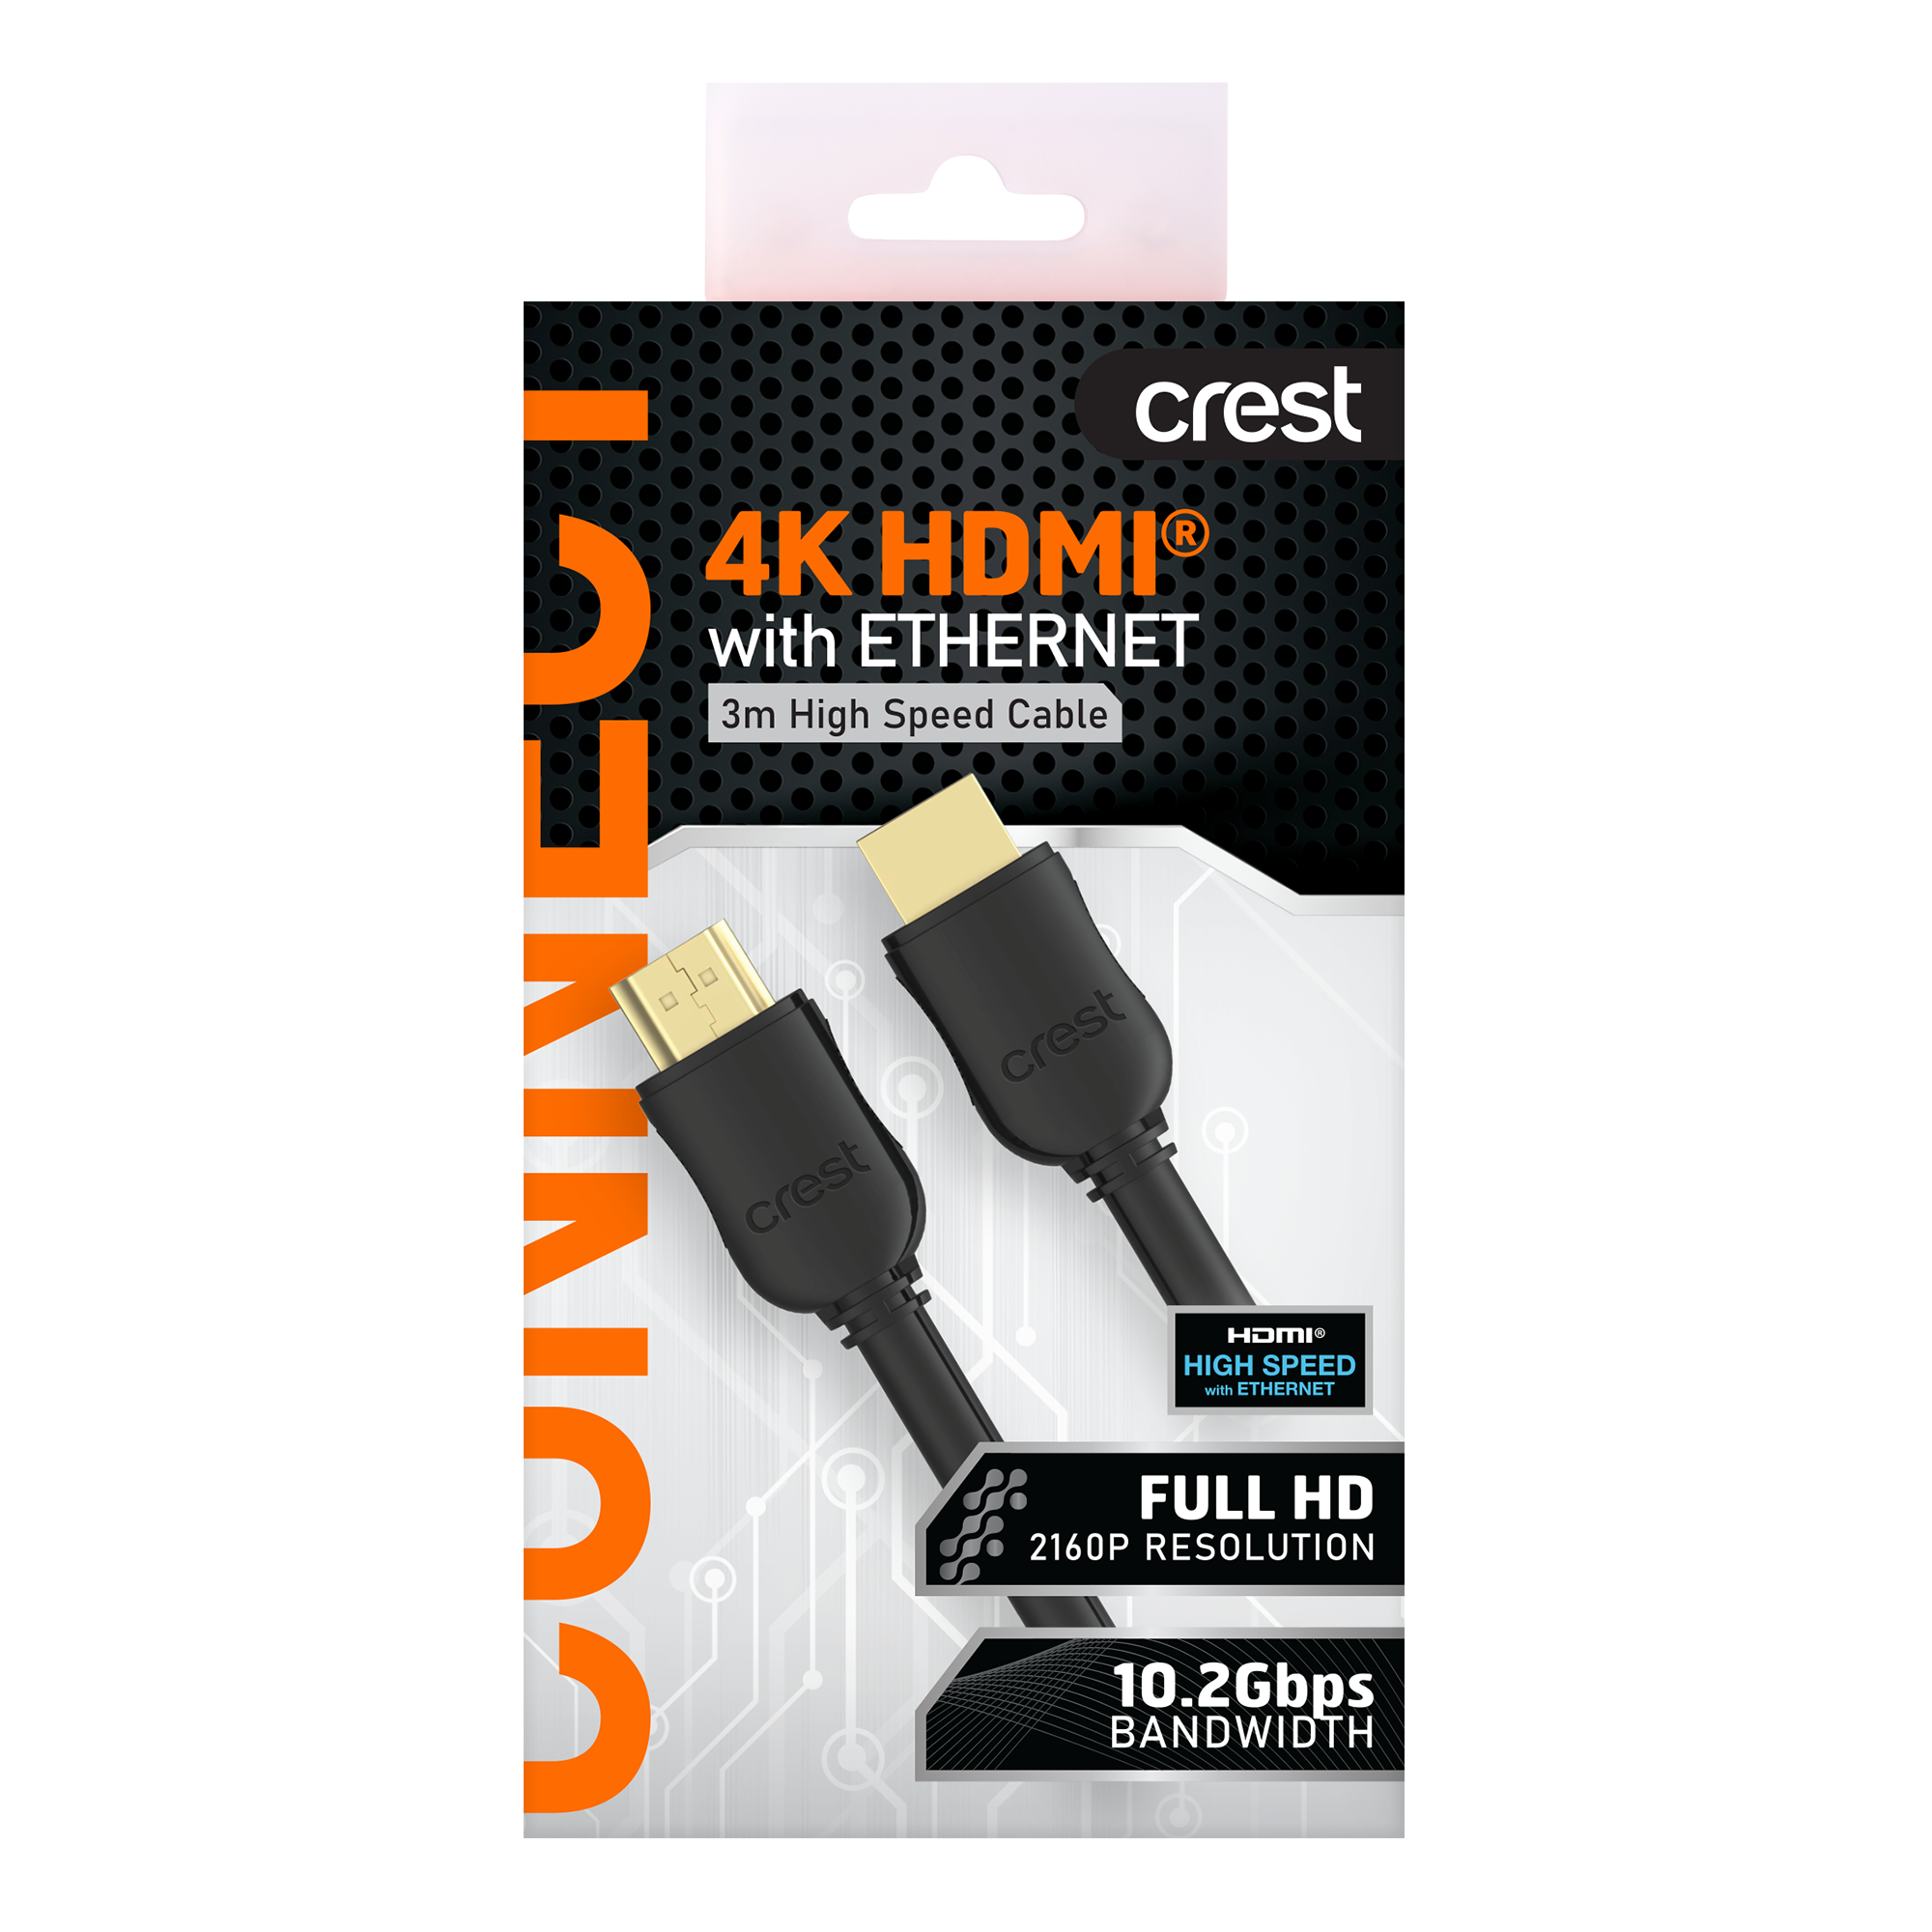 4K HDMI With Ethernet Cable 3M